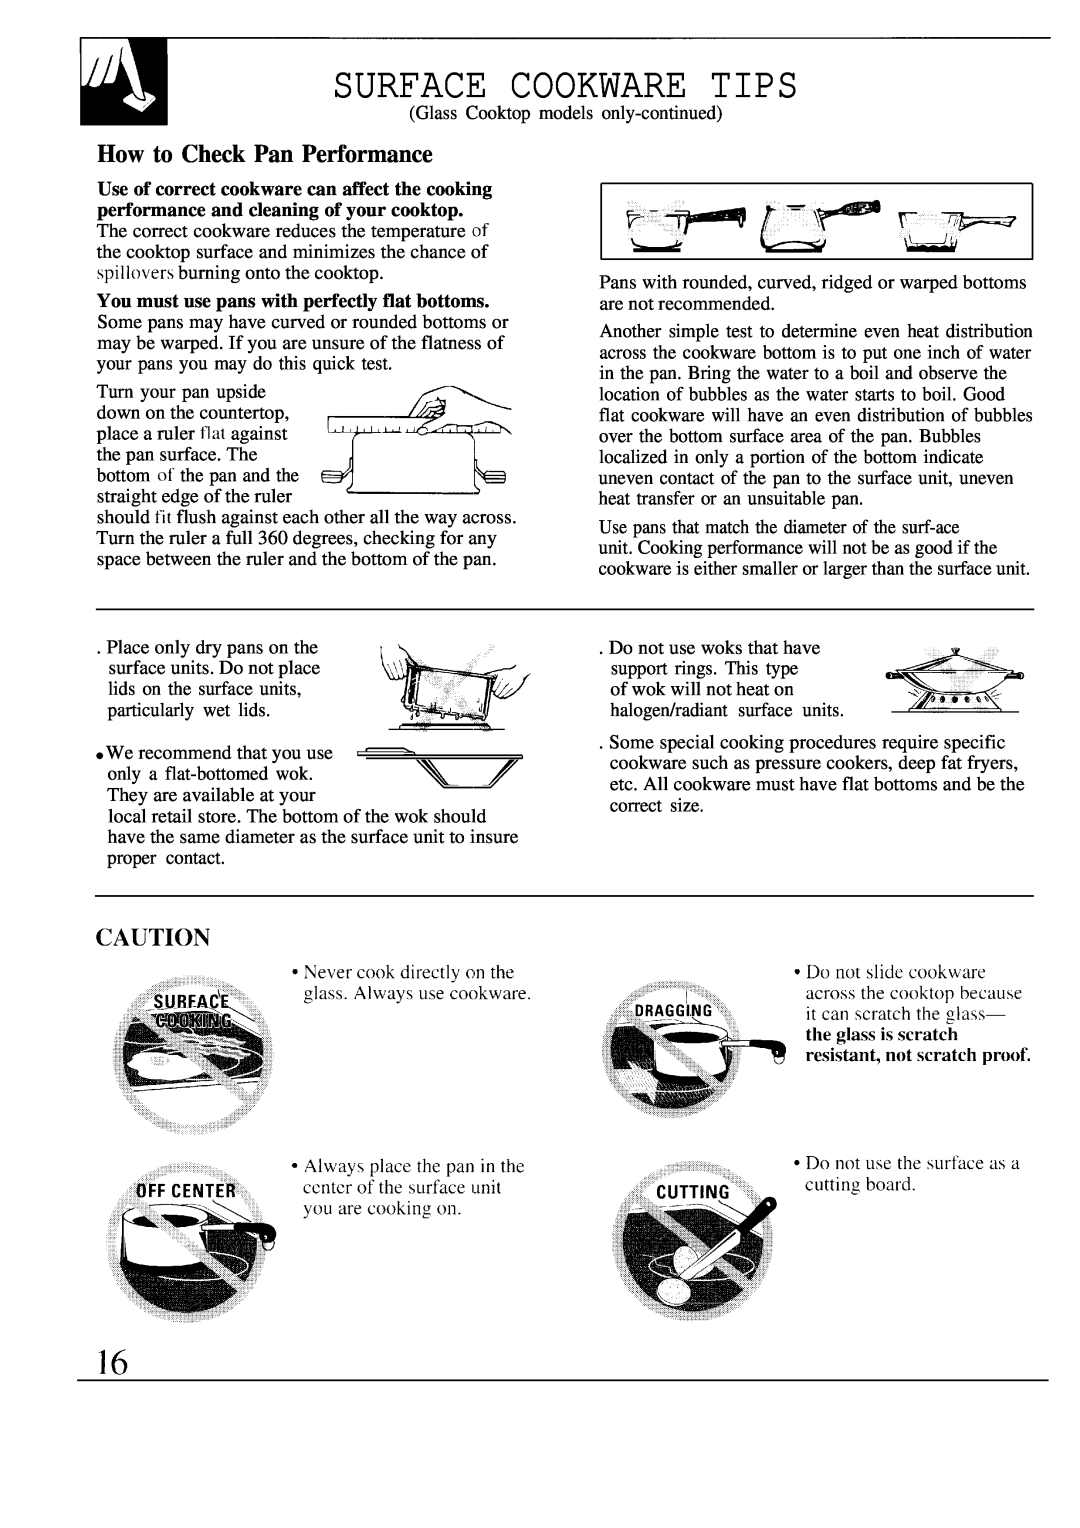 GE JBP80 warranty How to Check Pan Performance, Surface Cookware Tips 